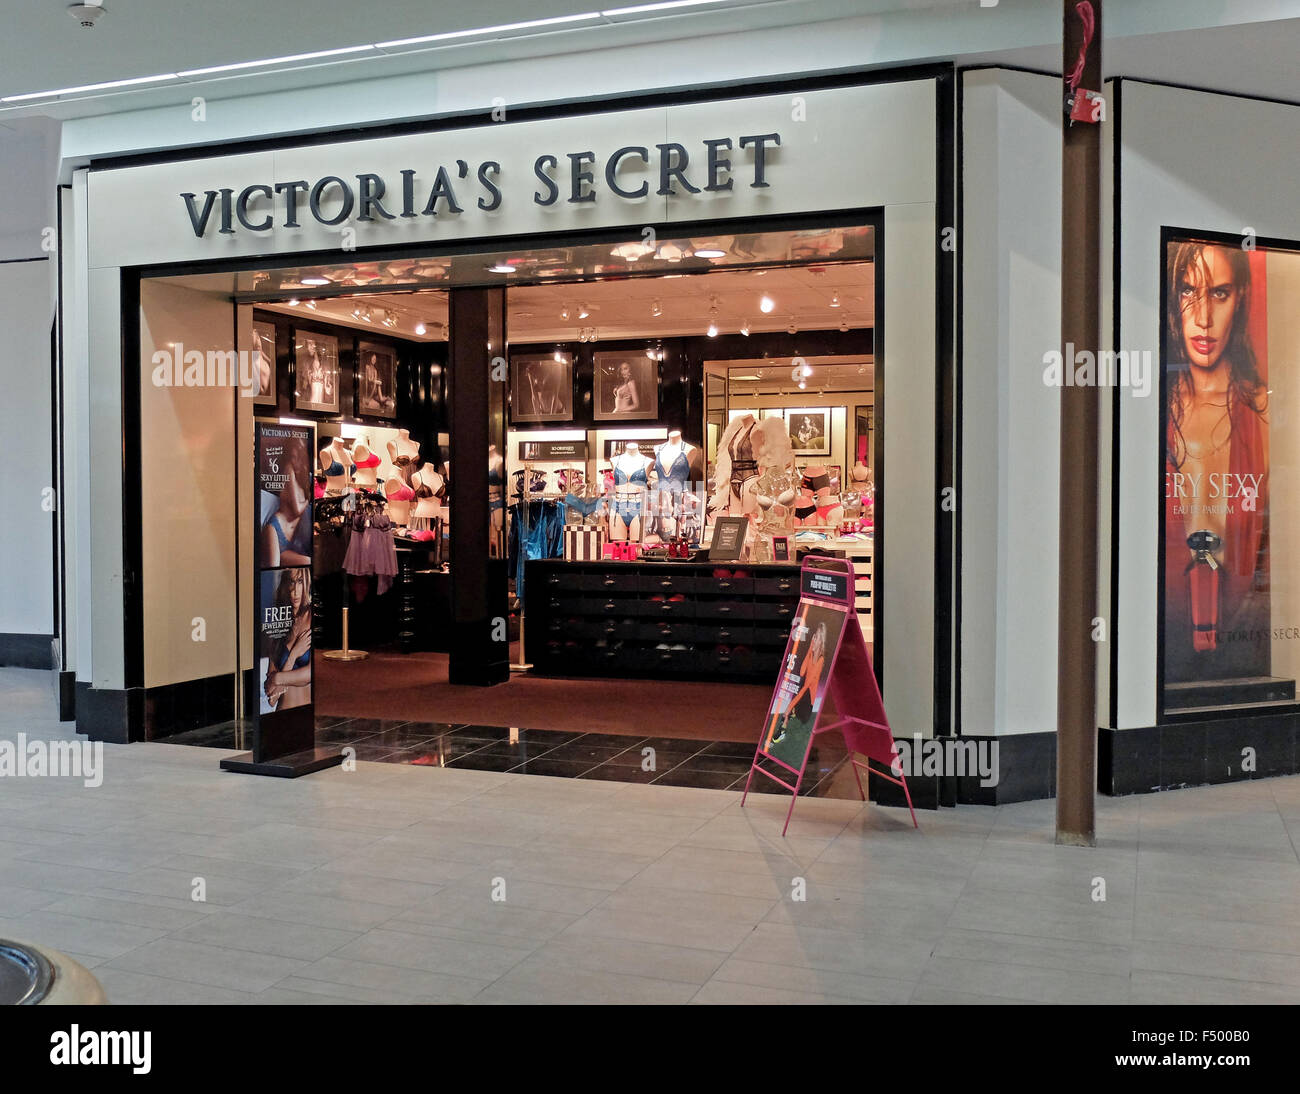 The exterior of the Victoria's Secret store at the Broadway Mall